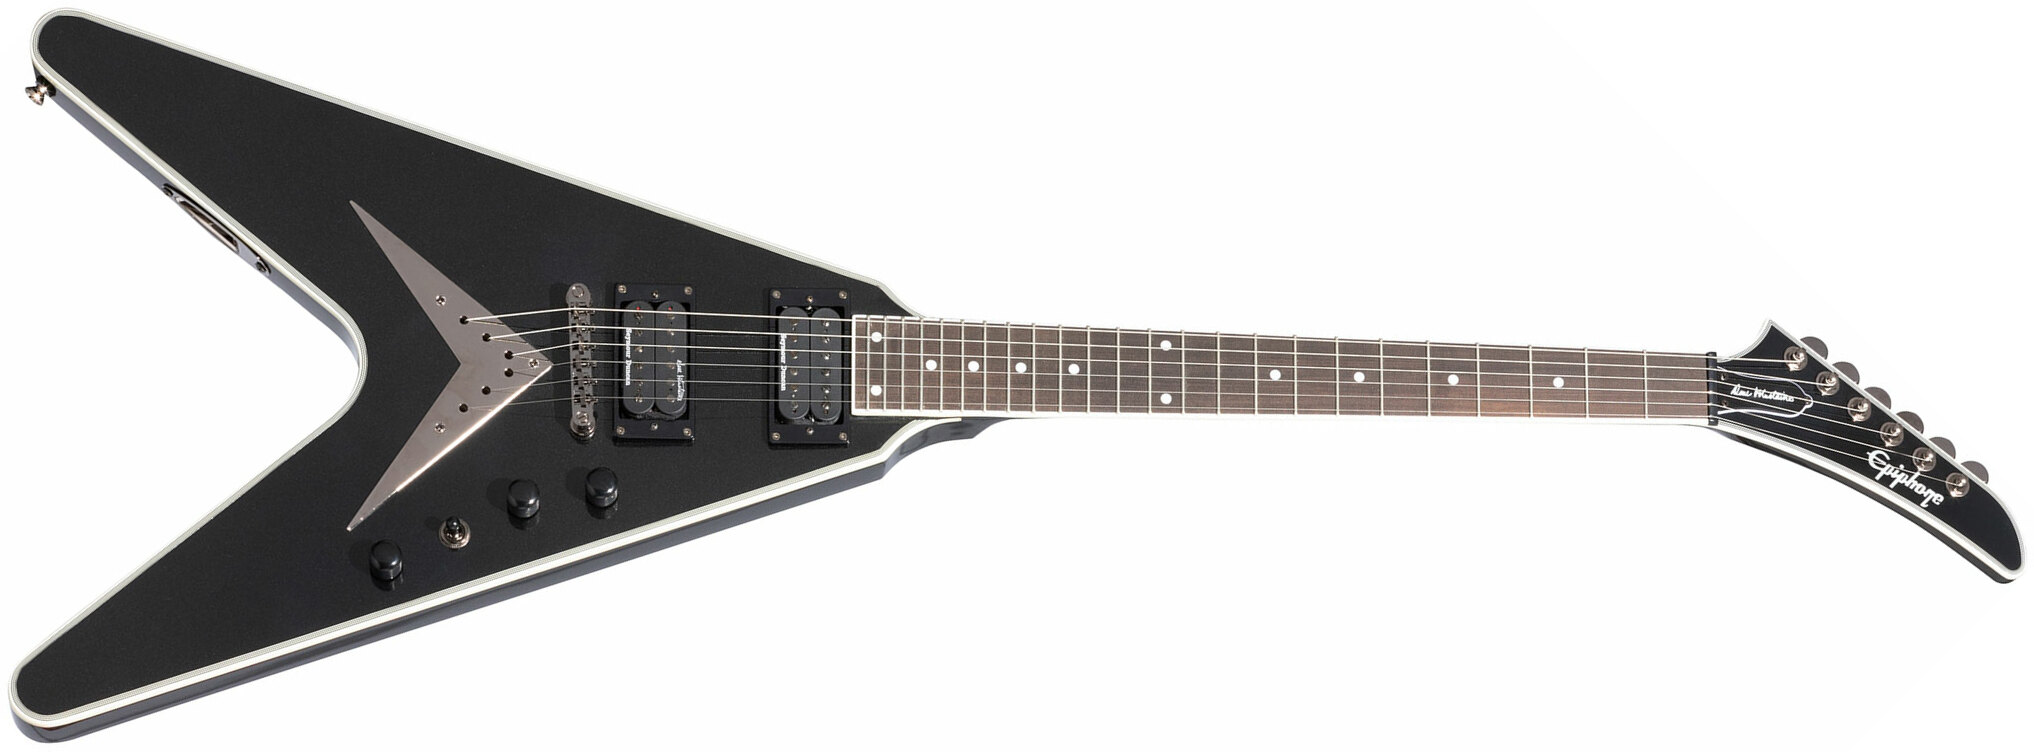 Epiphone Dave Mustaine Flying V Prophecy 2h Fishman Fluence Ht Eb - Black Metallic - Metal electric guitar - Main picture